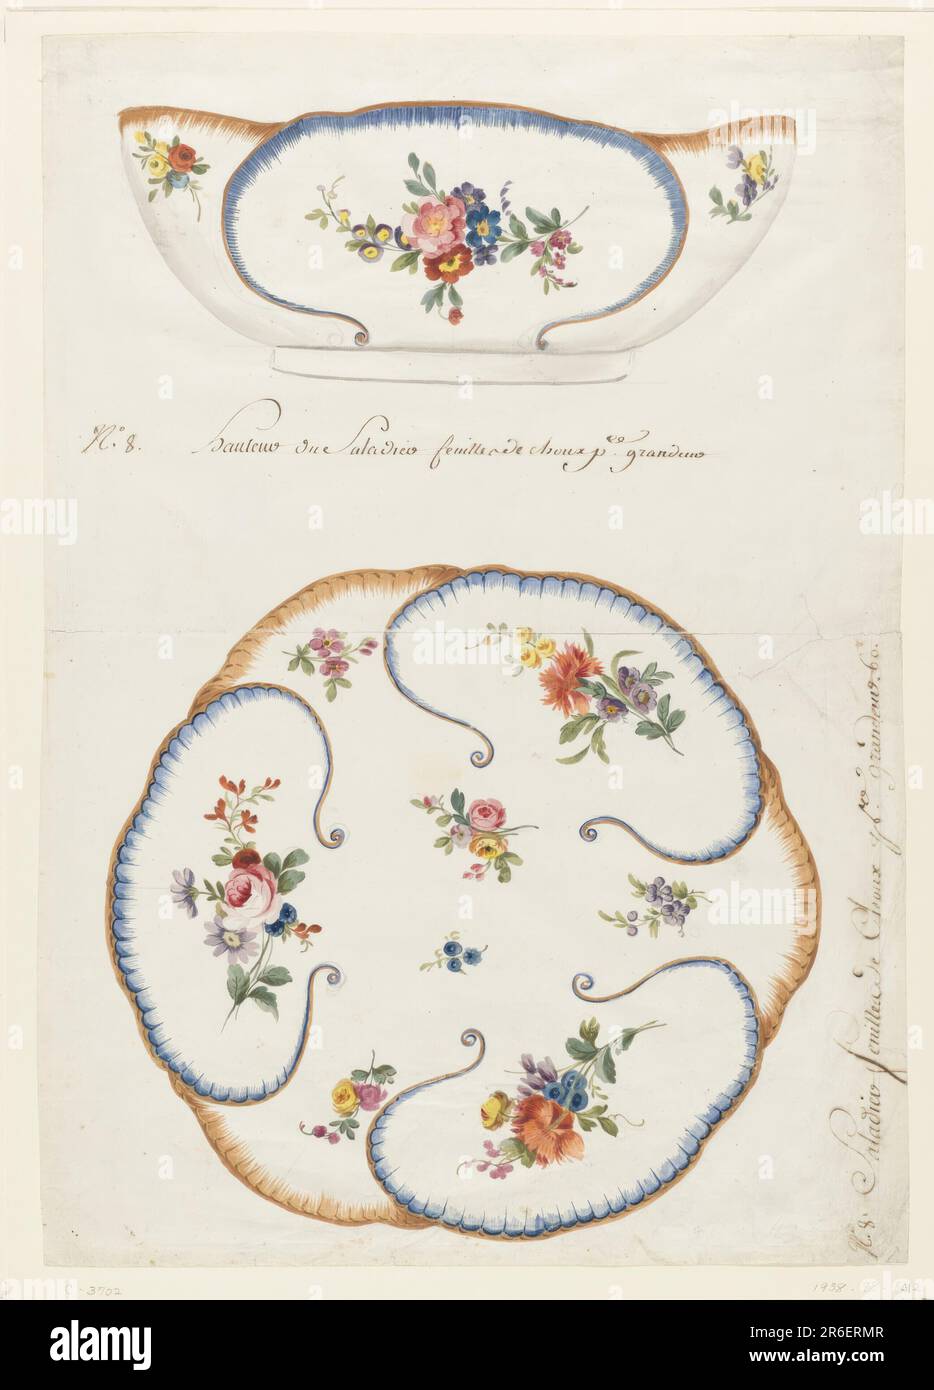 View of salad bowl in elevation (above) and plan (below), painted on exterior and interior in form of large cabbage-like leaves, each leaf bordered alternatively in blue and yellow/brown painted scallops. The reserves are painted with sprays of roses, tulips, and colored daisies. Brush and watercolor, black chalk on cream laid paper. Date: 1760-75. Museum: Cooper Hewitt, Smithsonian Design Museum. Stock Photo